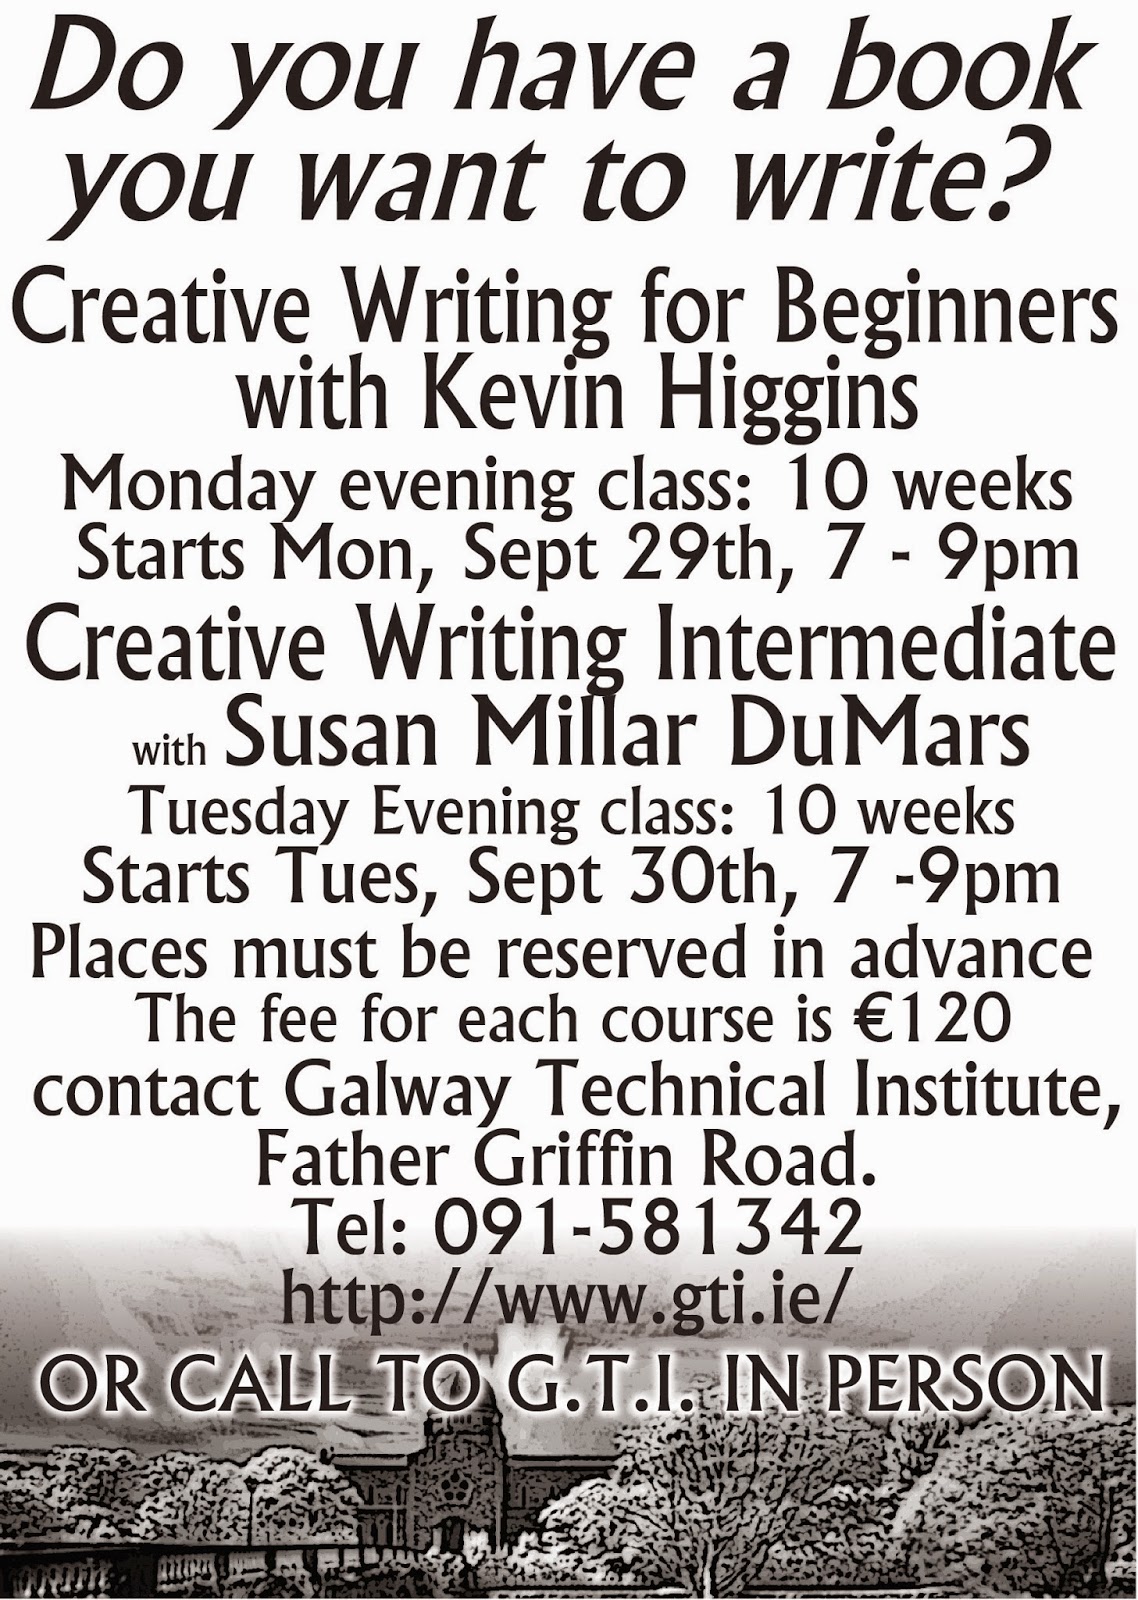 creative writing classes galway